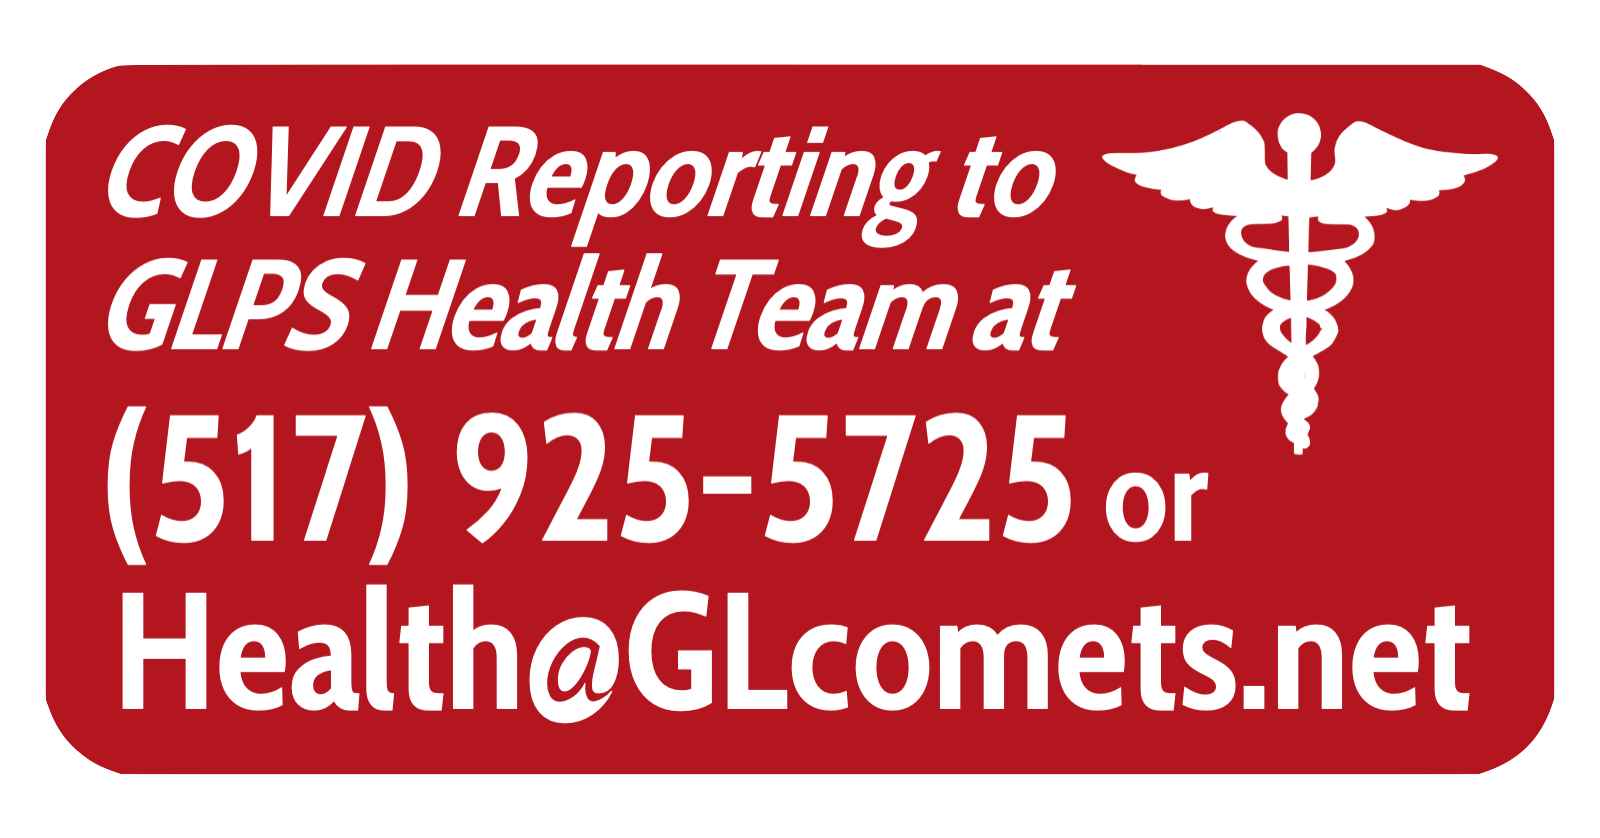 GLPS Health Hotline for COVID Reporting is (517) 925-5725